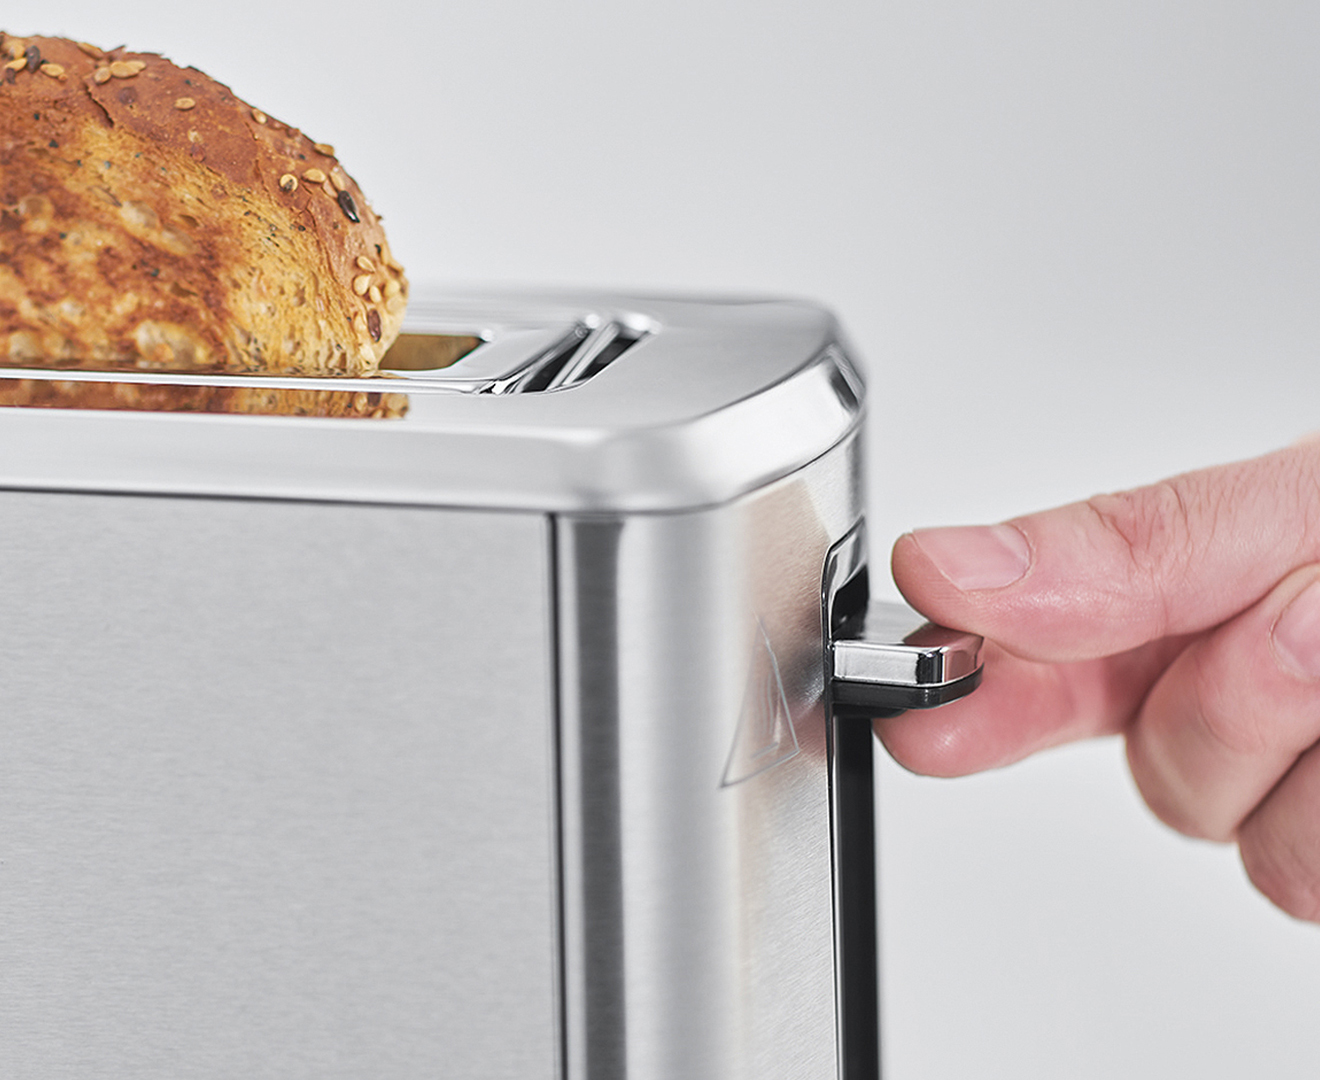 Russell Hobbs Studio 1 Slice Toaster RHT131 Review, Toaster